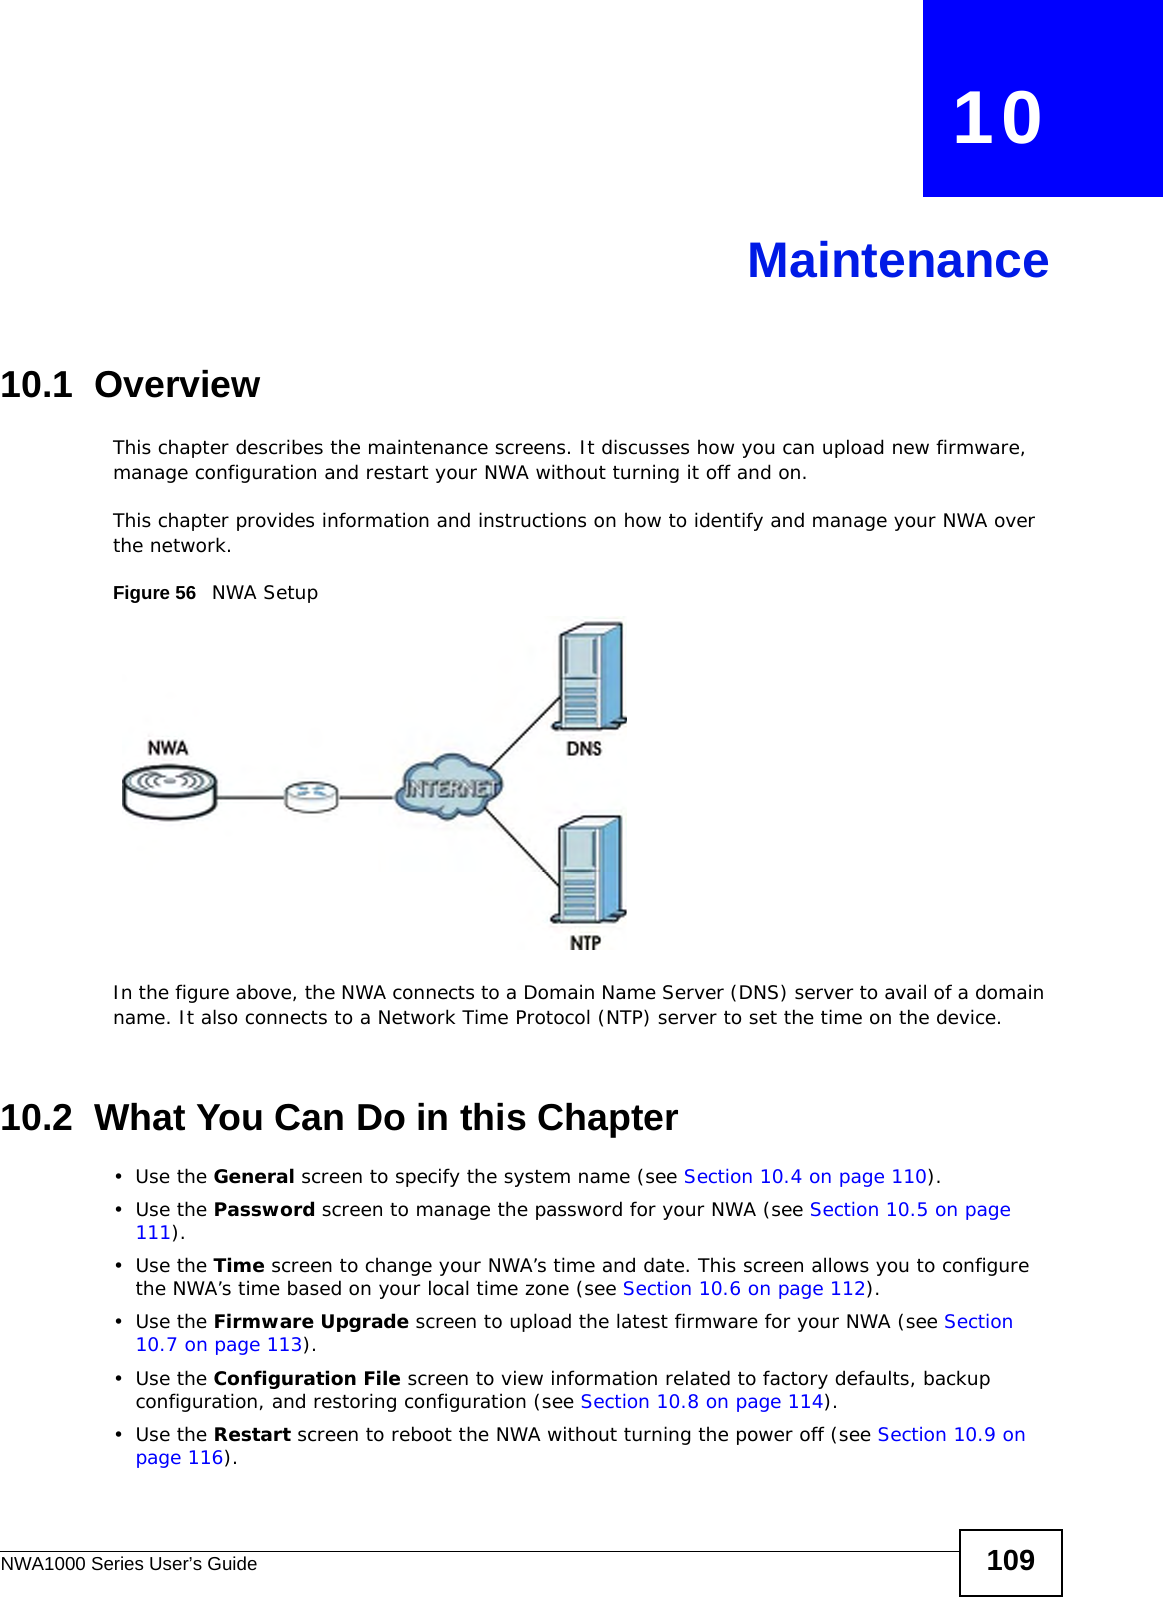 NWA1000 Series User’s Guide 109CHAPTER   10Maintenance10.1  OverviewThis chapter describes the maintenance screens. It discusses how you can upload new firmware, manage configuration and restart your NWA without turning it off and on. This chapter provides information and instructions on how to identify and manage your NWA over the network. Figure 56   NWA Setup In the figure above, the NWA connects to a Domain Name Server (DNS) server to avail of a domain name. It also connects to a Network Time Protocol (NTP) server to set the time on the device.10.2  What You Can Do in this Chapter•Use the General screen to specify the system name (see Section 10.4 on page 110).•Use the Password screen to manage the password for your NWA (see Section 10.5 on page 111).•Use the Time screen to change your NWA’s time and date. This screen allows you to configure the NWA’s time based on your local time zone (see Section 10.6 on page 112).•Use the Firmware Upgrade screen to upload the latest firmware for your NWA (see Section 10.7 on page 113).•Use the Configuration File screen to view information related to factory defaults, backup configuration, and restoring configuration (see Section 10.8 on page 114).•Use the Restart screen to reboot the NWA without turning the power off (see Section 10.9 on page 116). 